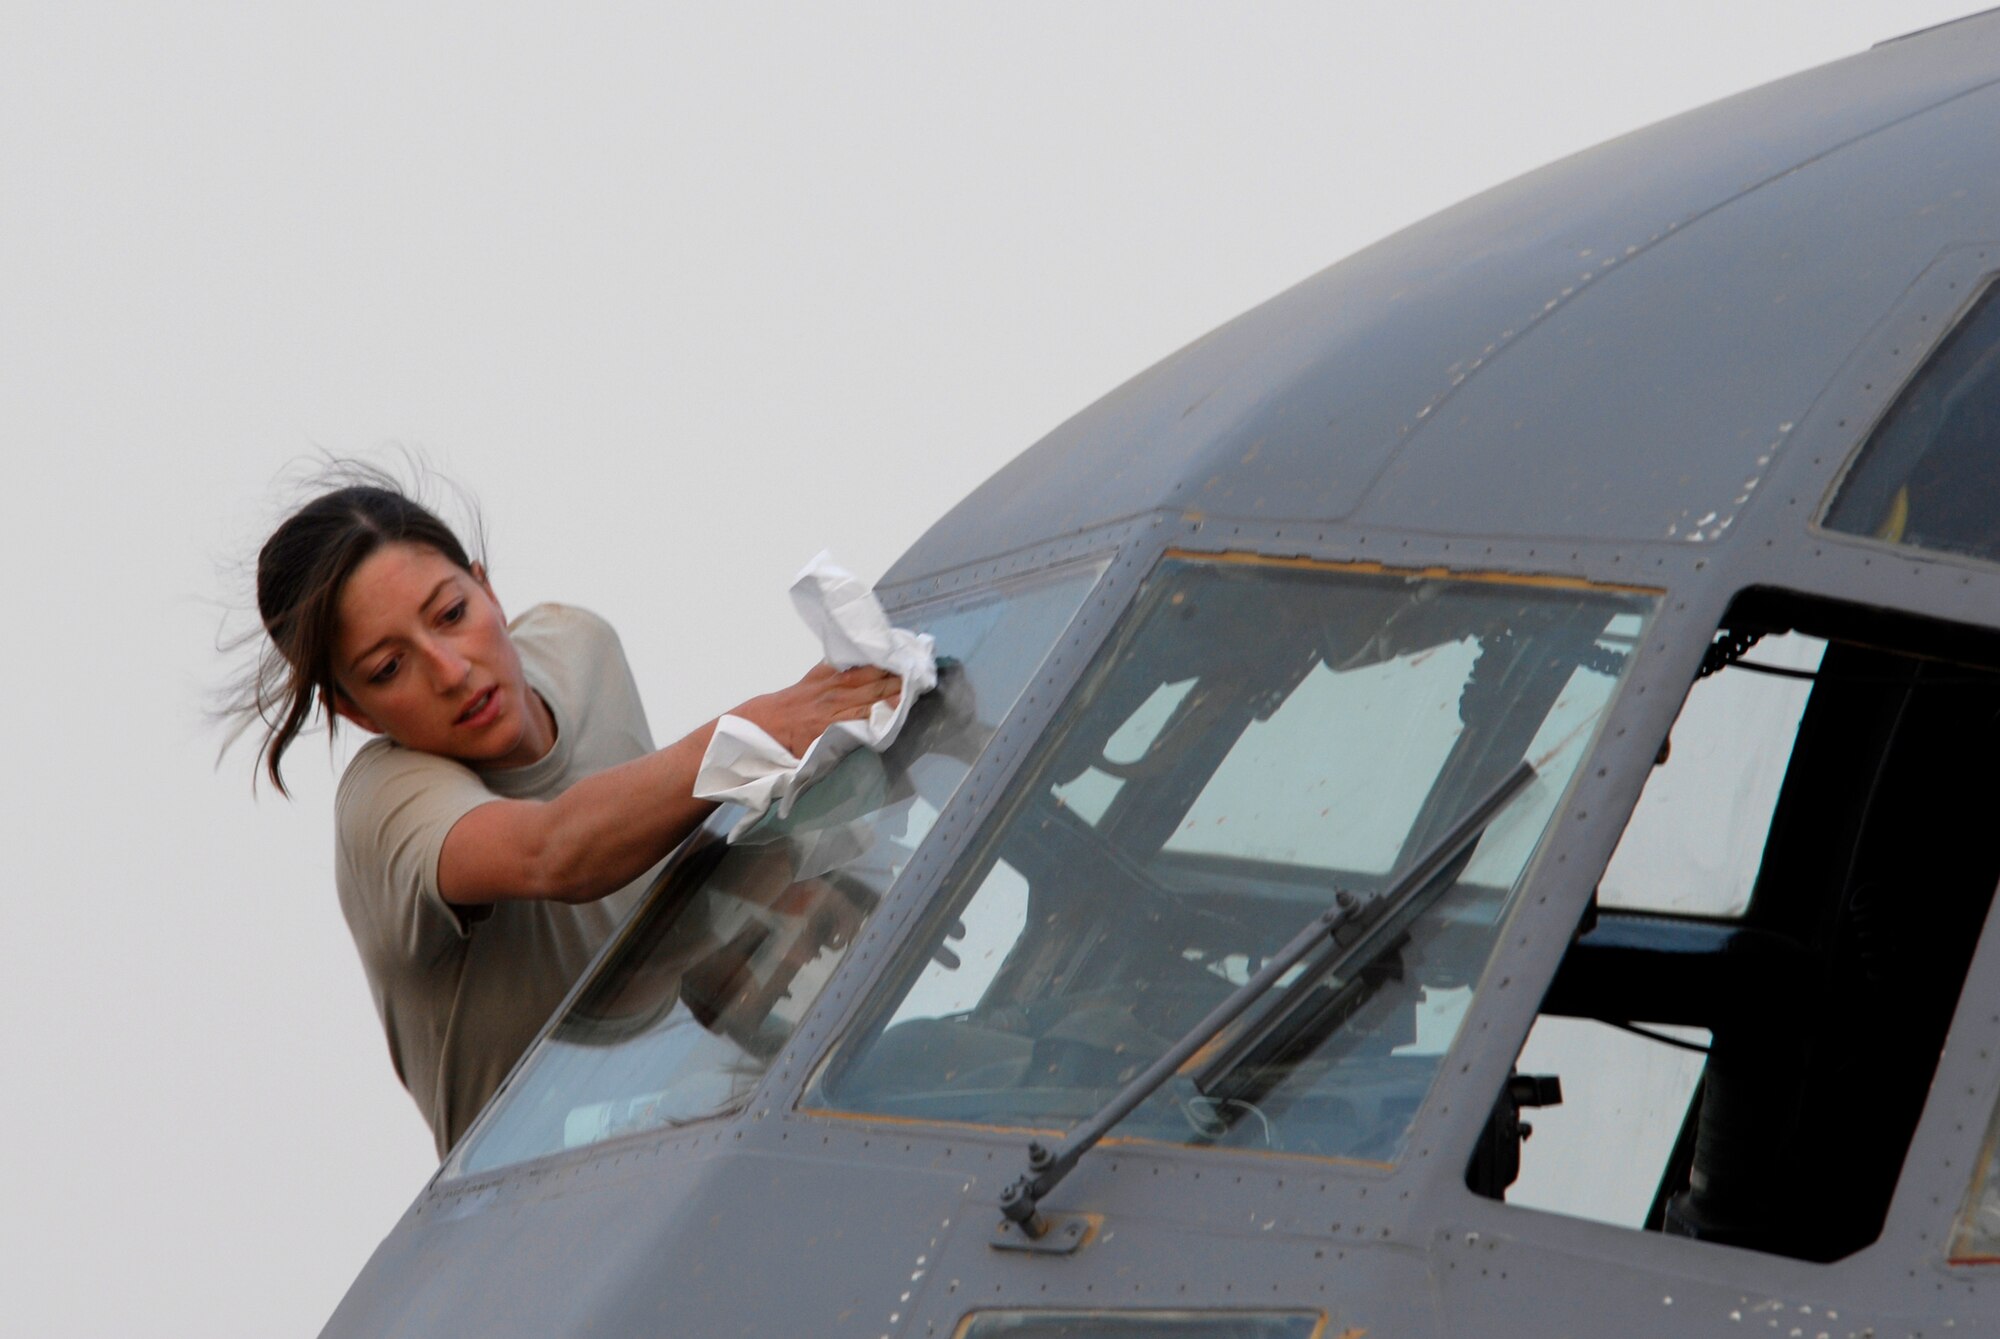 SOUTHWEST ASIA -- Senior Airman Maura Dennehy, a crew chief deployed to the 386th Expeditionary Aircraft Maintenance Squadron, washes the windows of a C-130 Hercules prior to the take-off of a combat sortie that transported Soldiers into Iraq April 21, 2008, from an air base in the Persian Gulf Region. The Air Force recently surpassed more than one million sorties flown by Air Force aircraft in the Global War on Terror since Sept. 11, 2001. Synchronized and integrated into larger coalition air efforts, these missions represent the most deliberate, disciplined and precise air campaign in history. Airman Dennehy is deployed from the 317th Maintenance Squadron, Dyess Air Force Base, Texas. (U.S. Air Force photo/ Staff Sgt. Patrick Dixon)